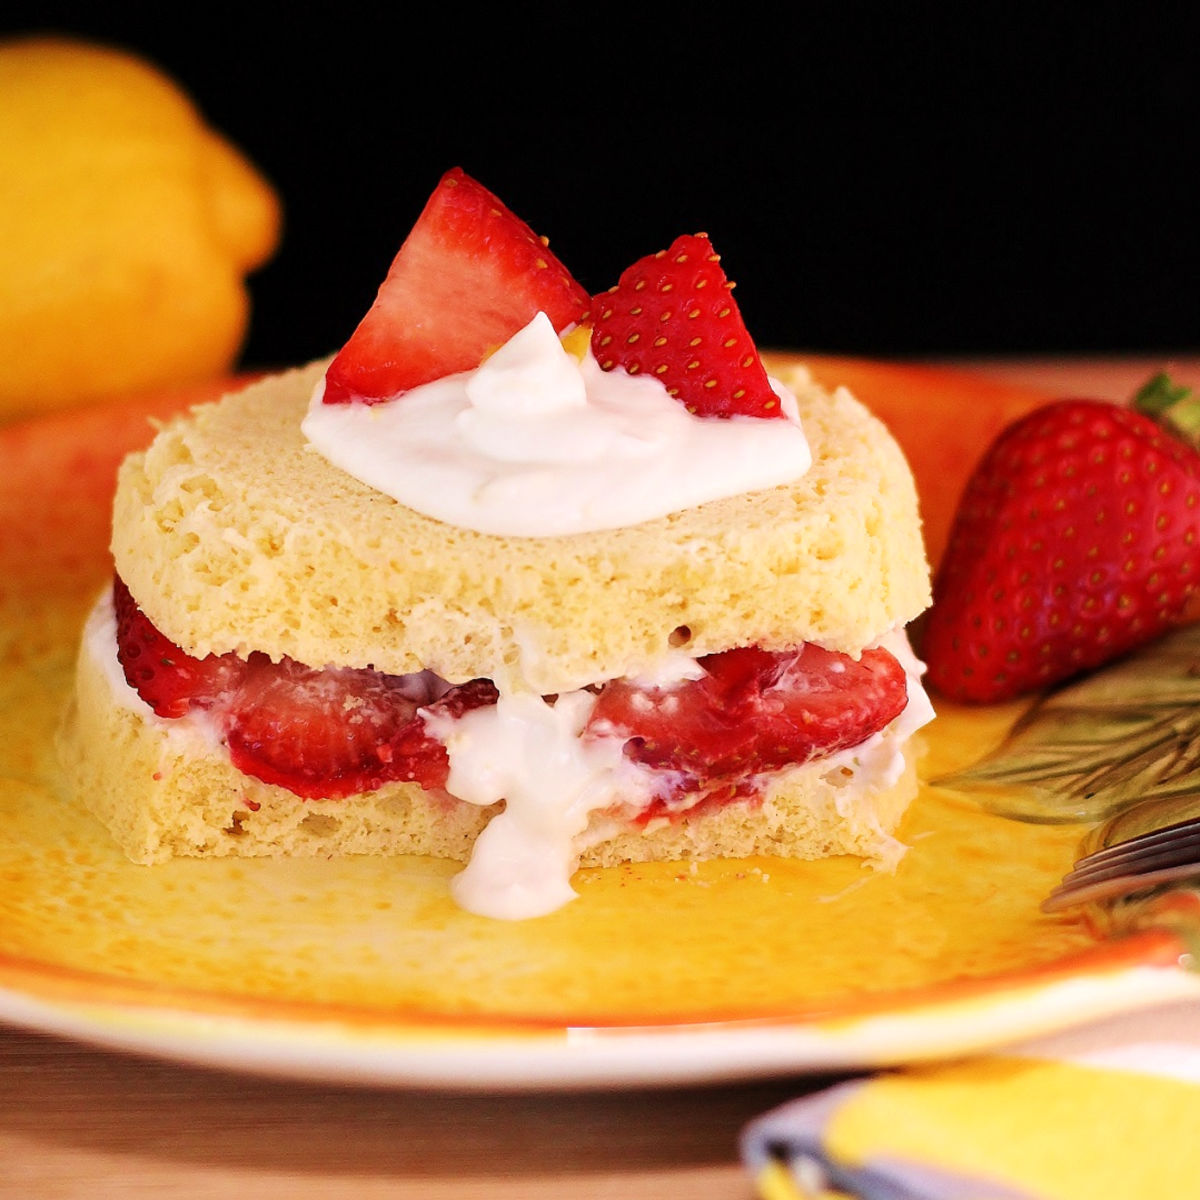 A quick & simple strawberry lemon shortcake with cream & berries.